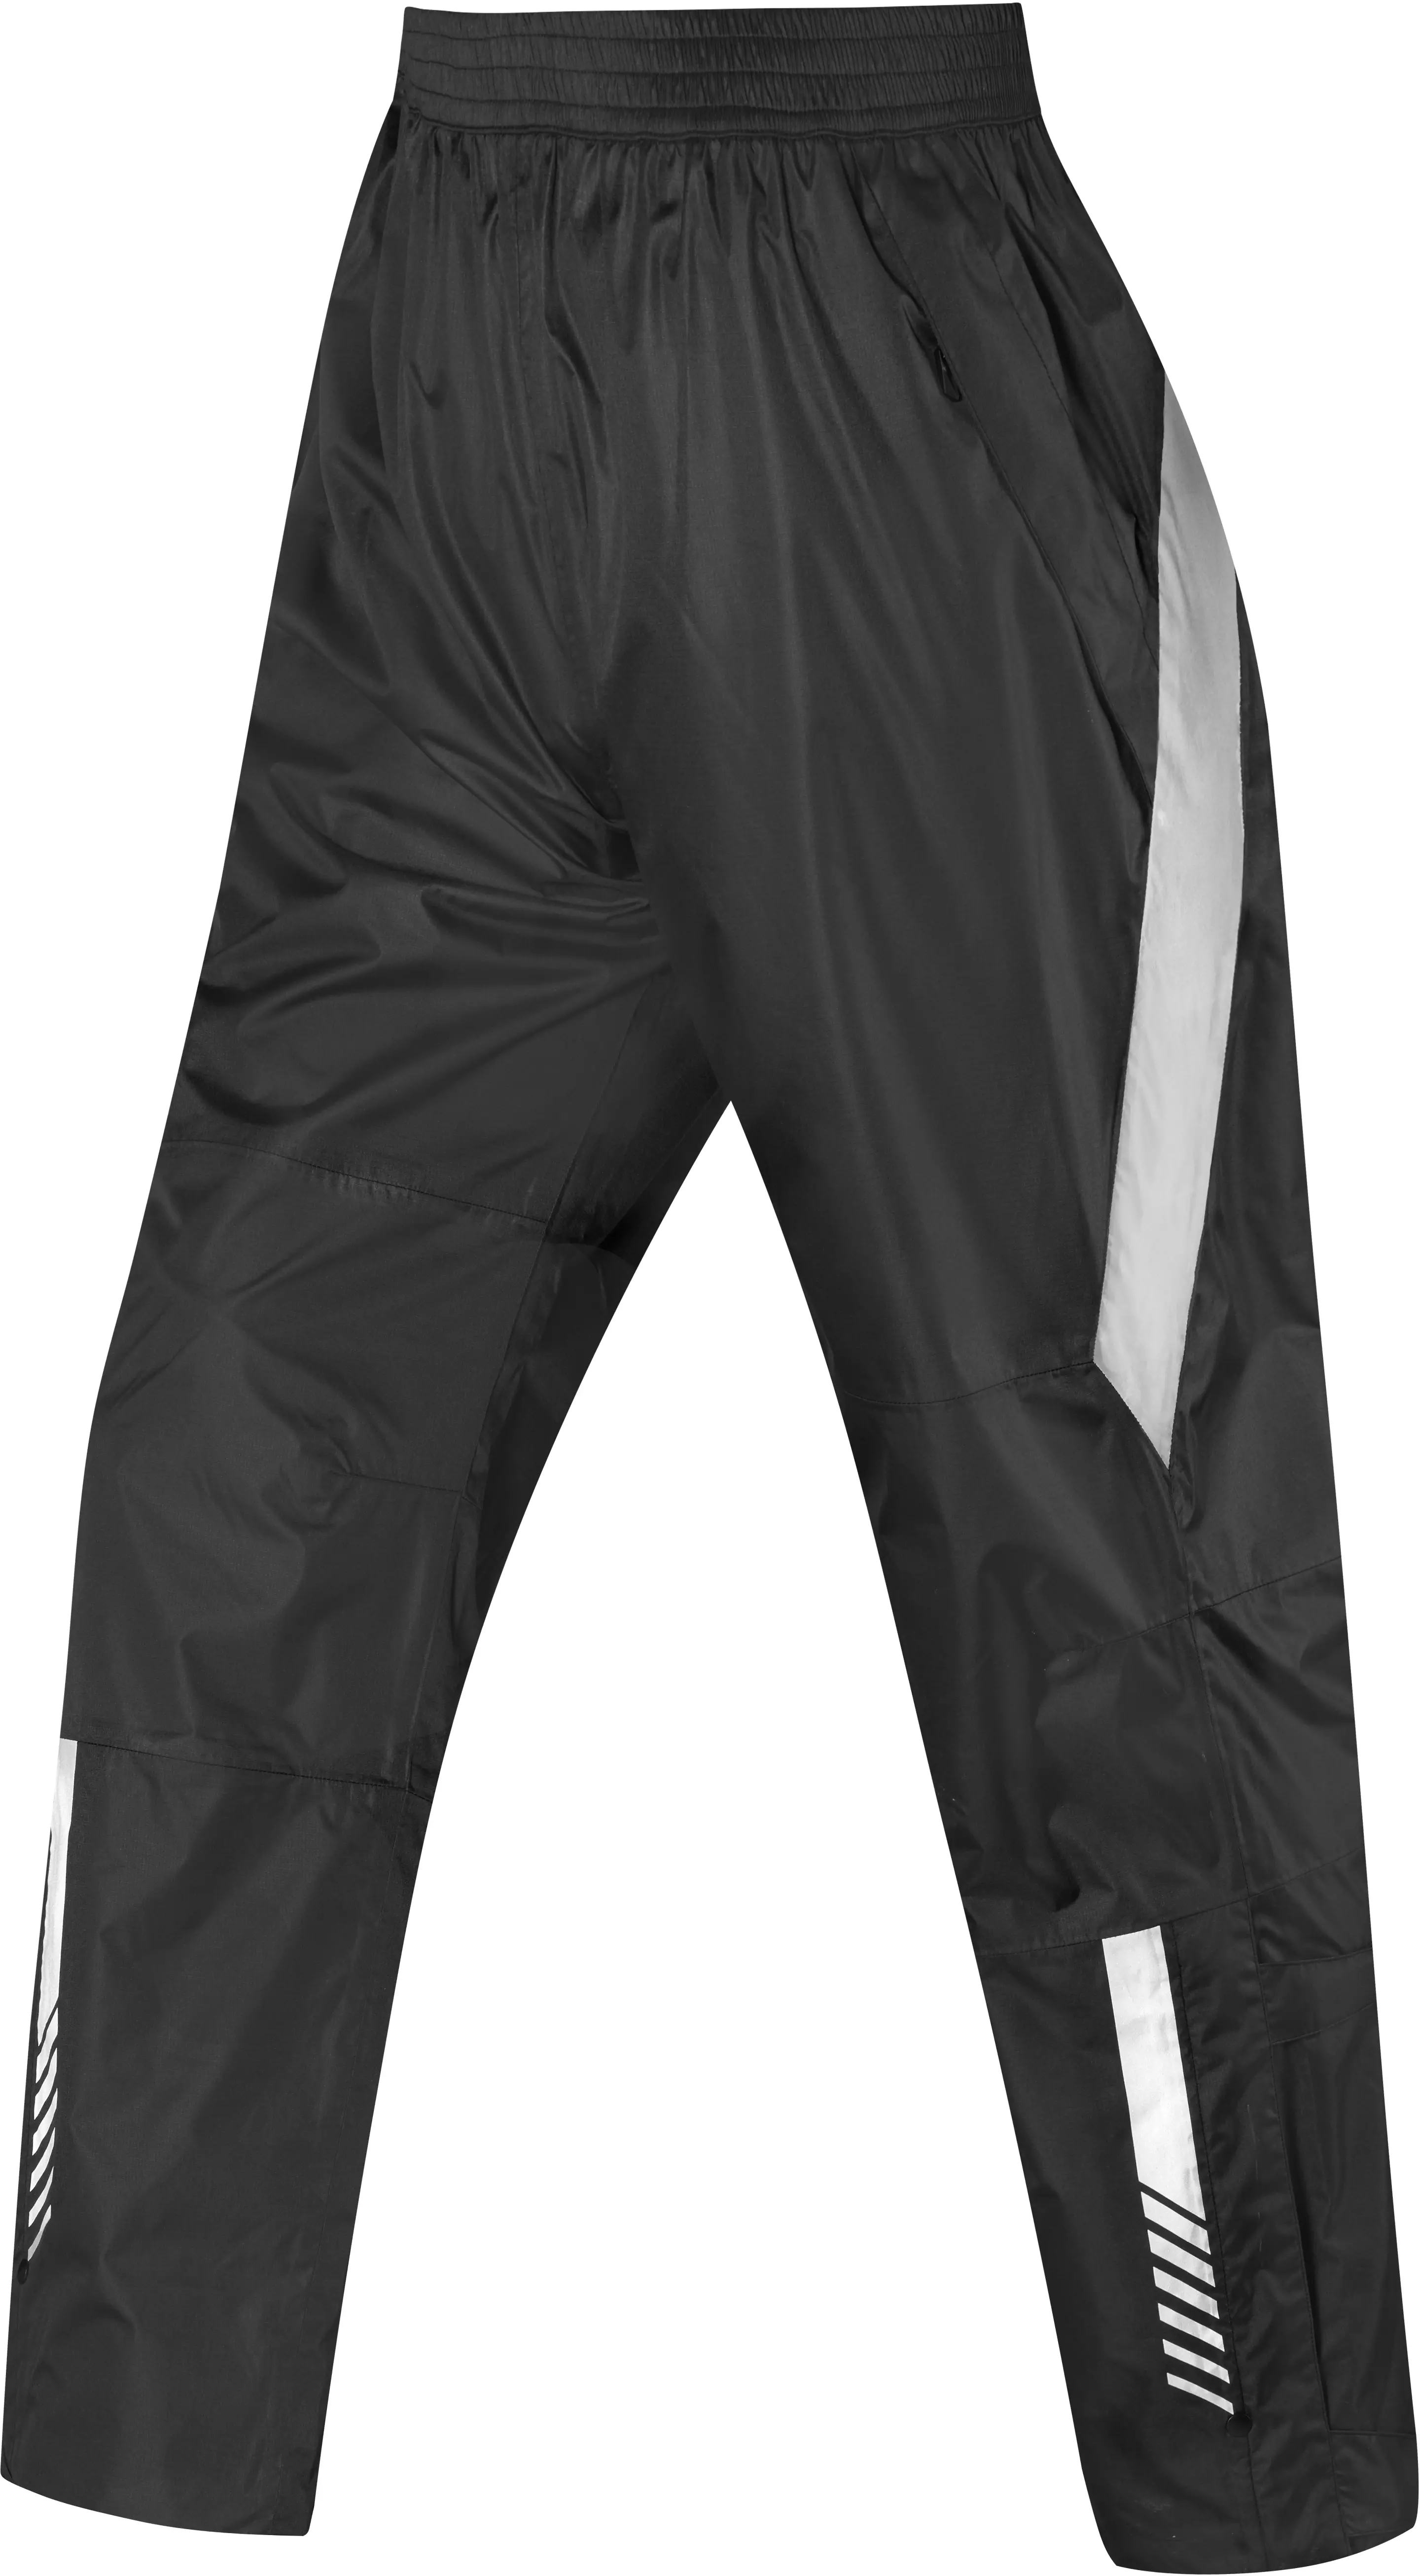 Cycling Trousers & Overtrousers